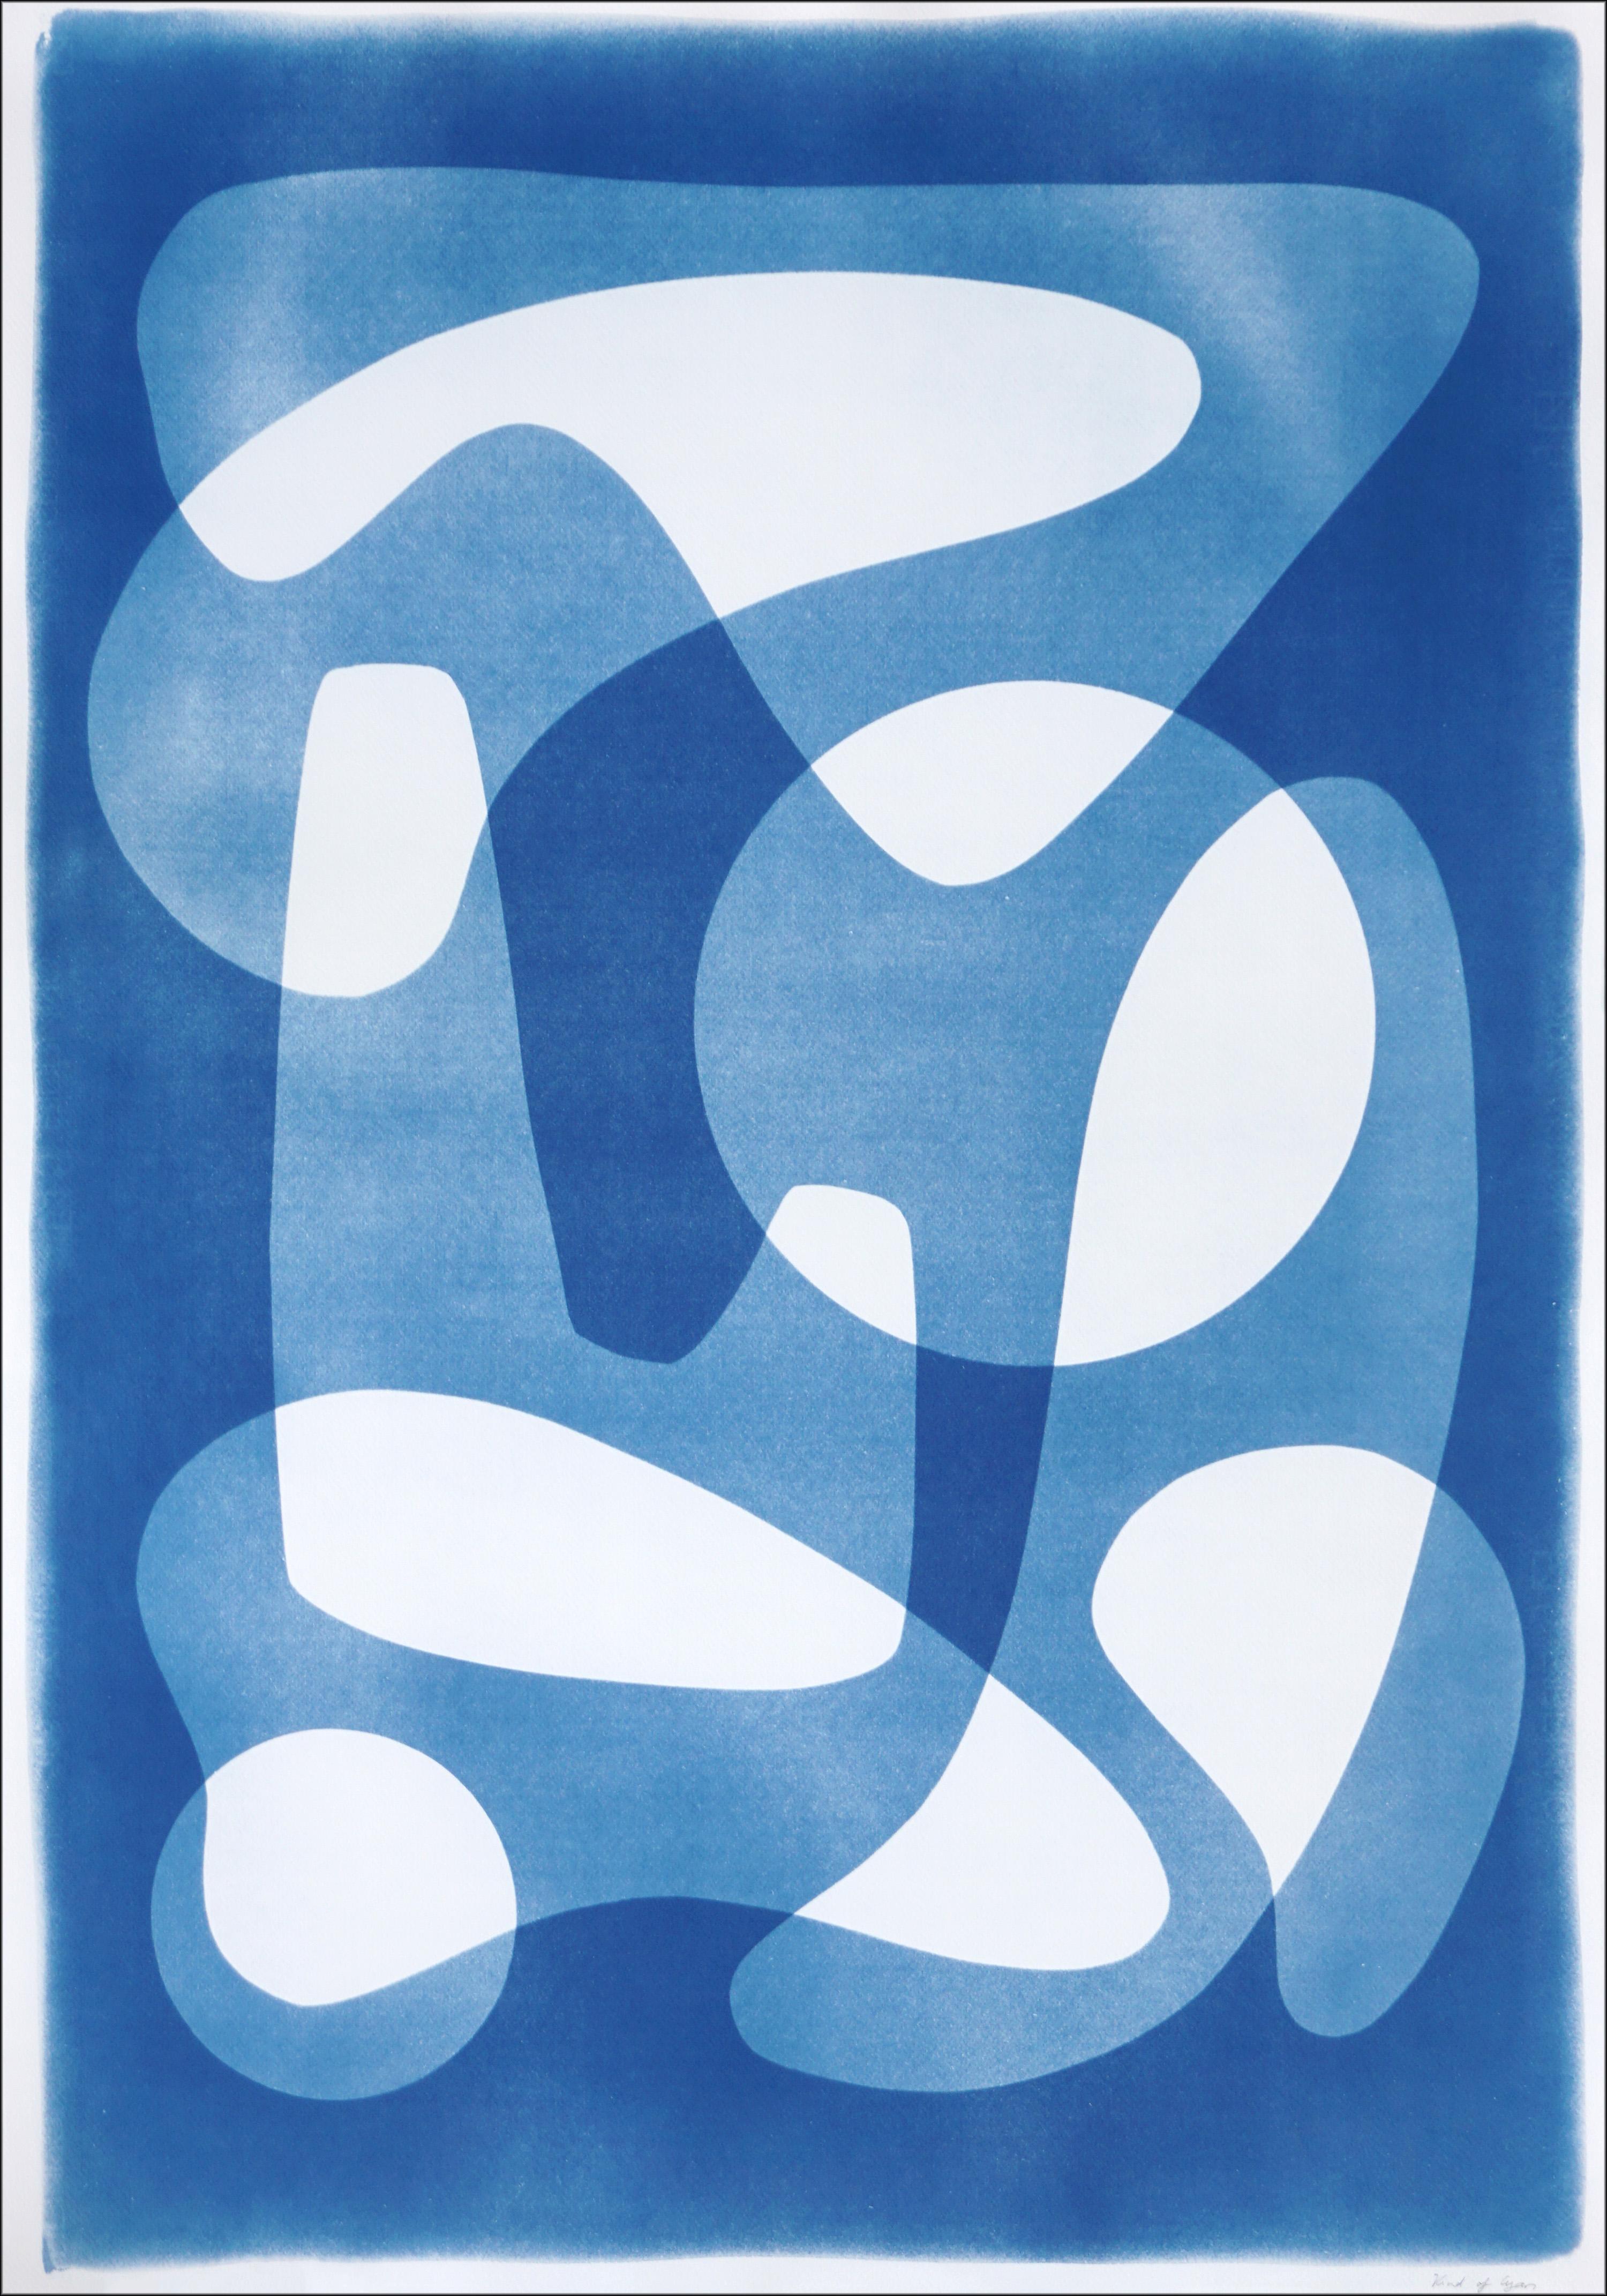 Kind of Cyan Abstract Photograph - Handmade Cyanotype in White and Blue, Mid Century Modern Abstract Shapes, Paper